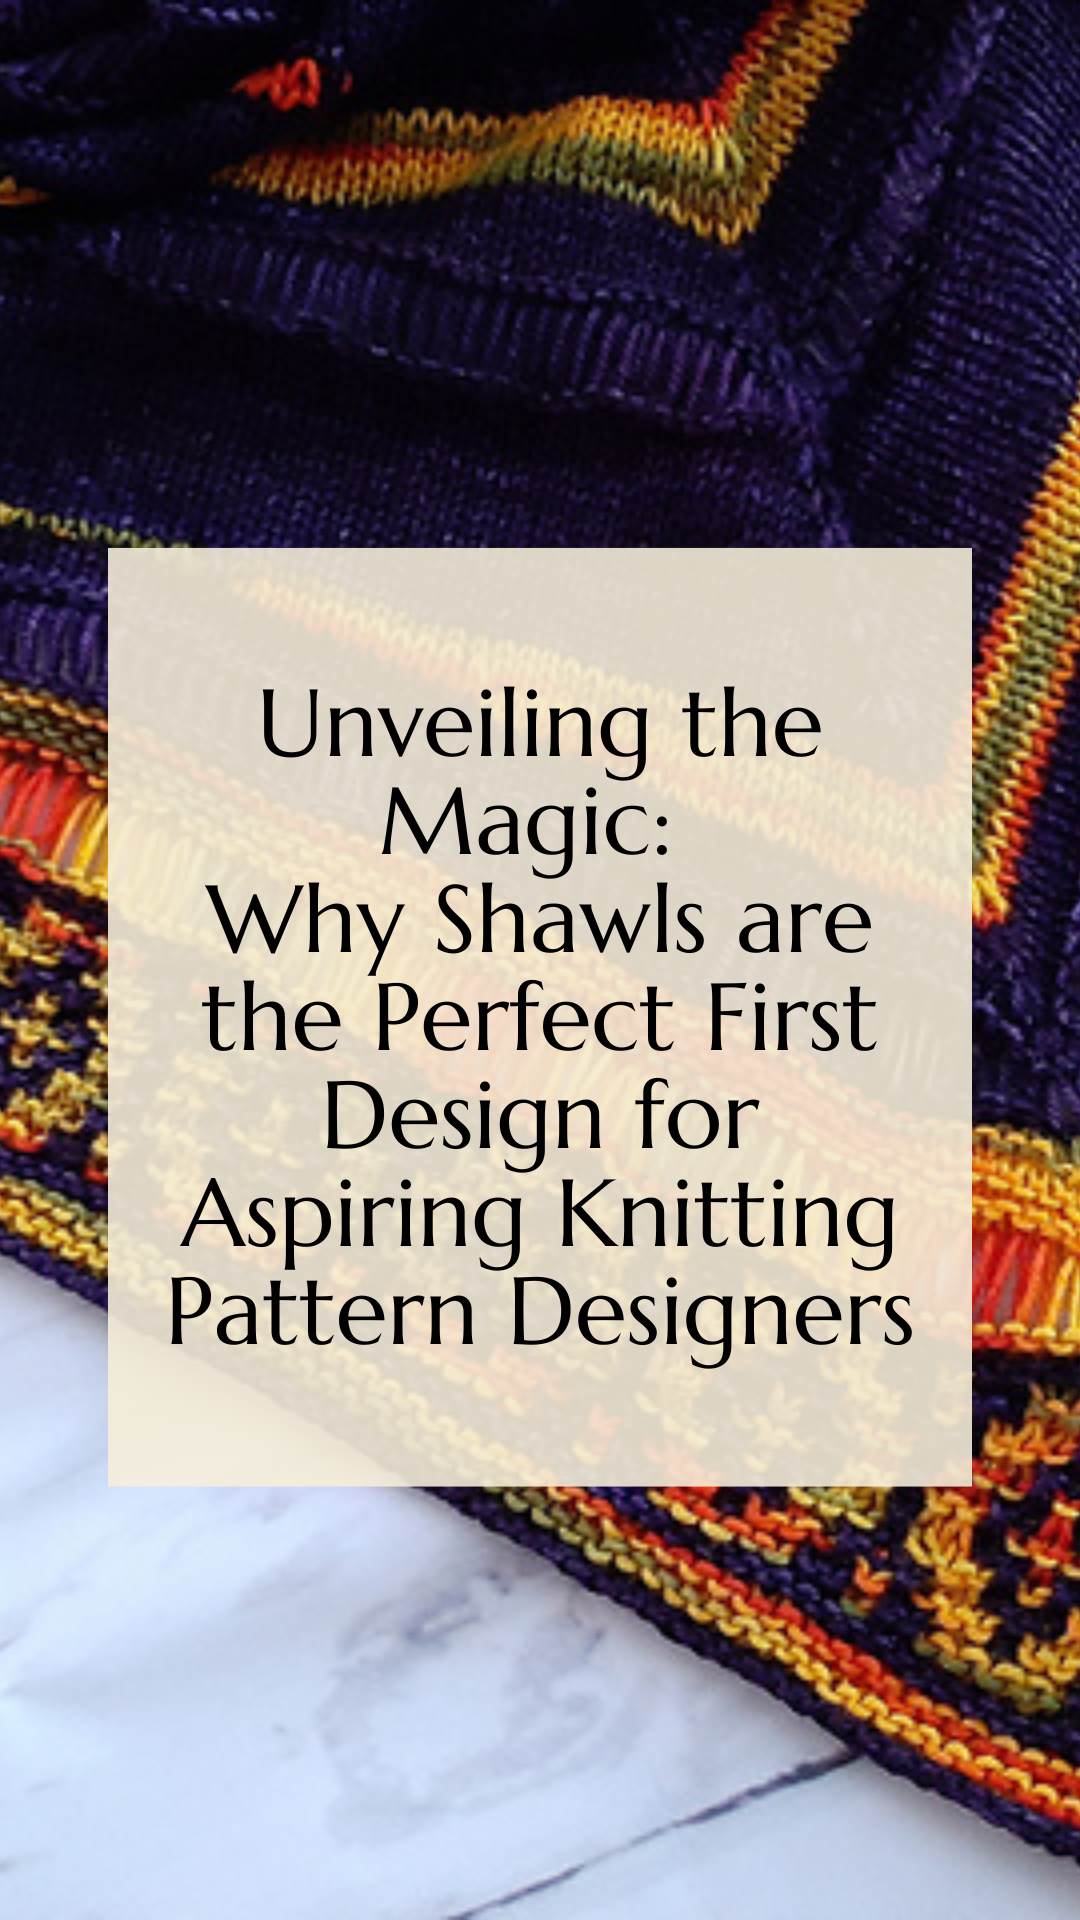 Unveiling the Magic: Why Shawls are the Perfect First Design for Aspiring Knitting Pattern Designers